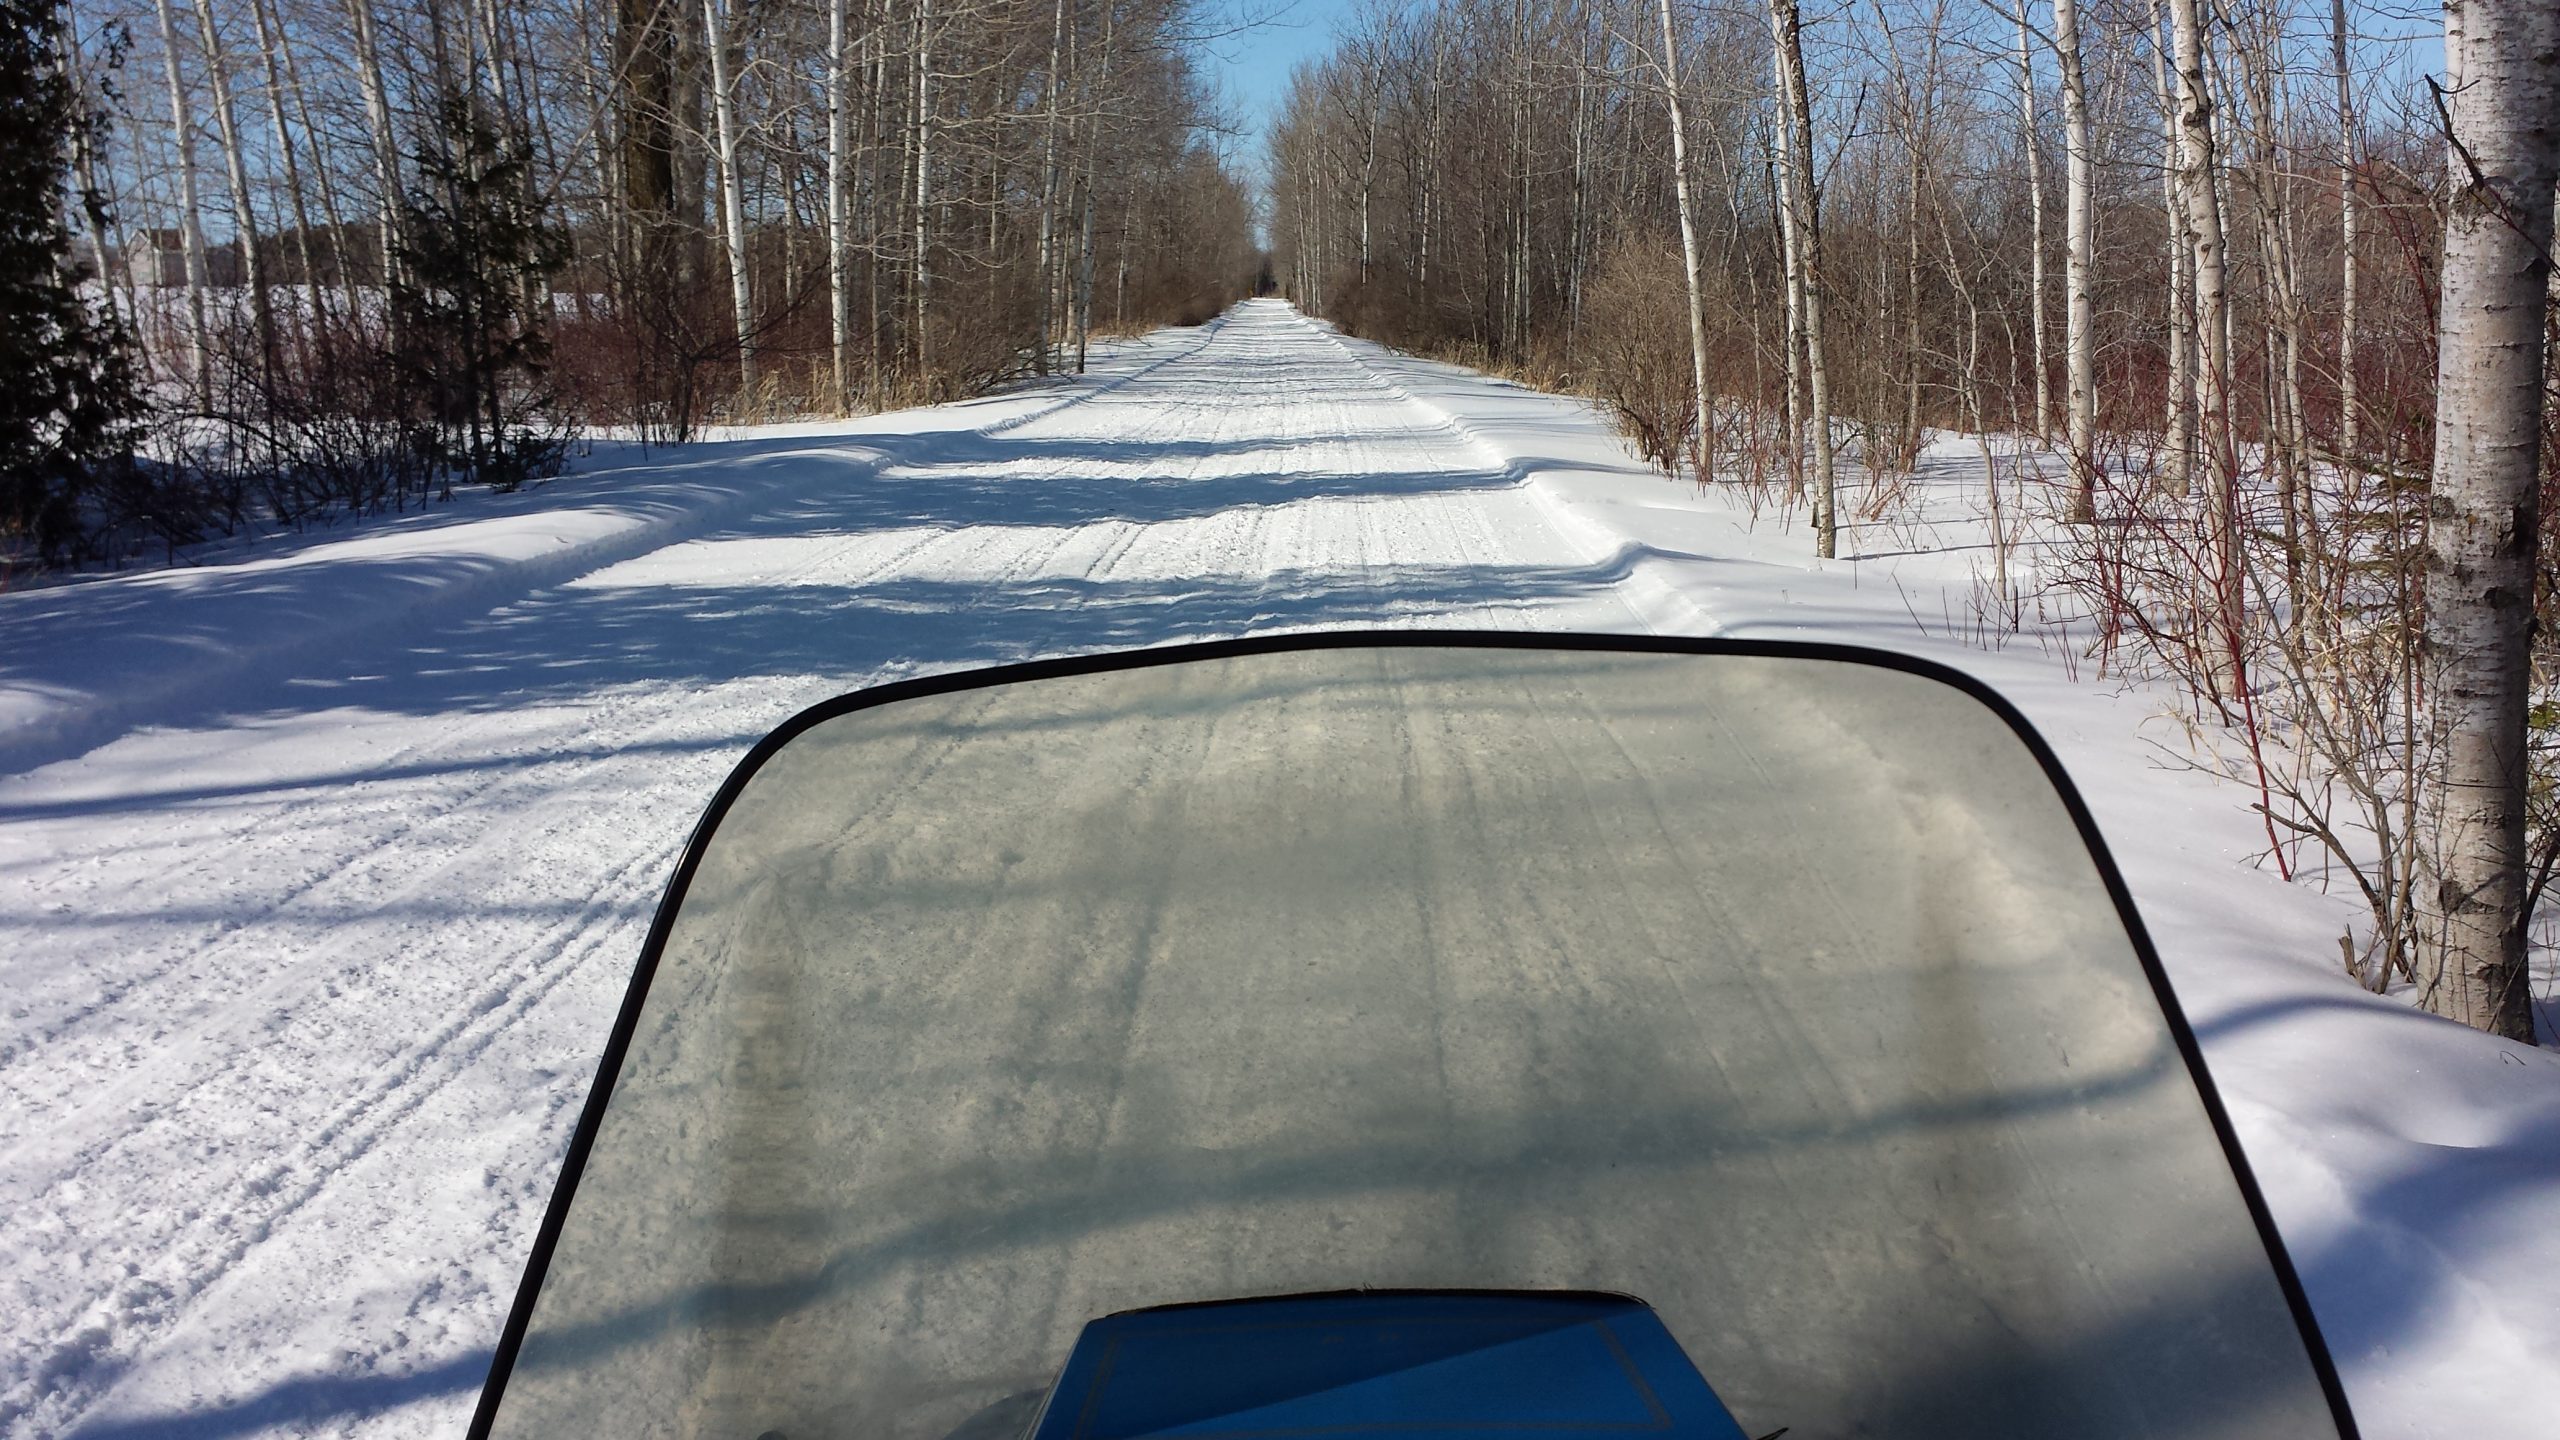 Kewaunee County, WI snowmobile trails